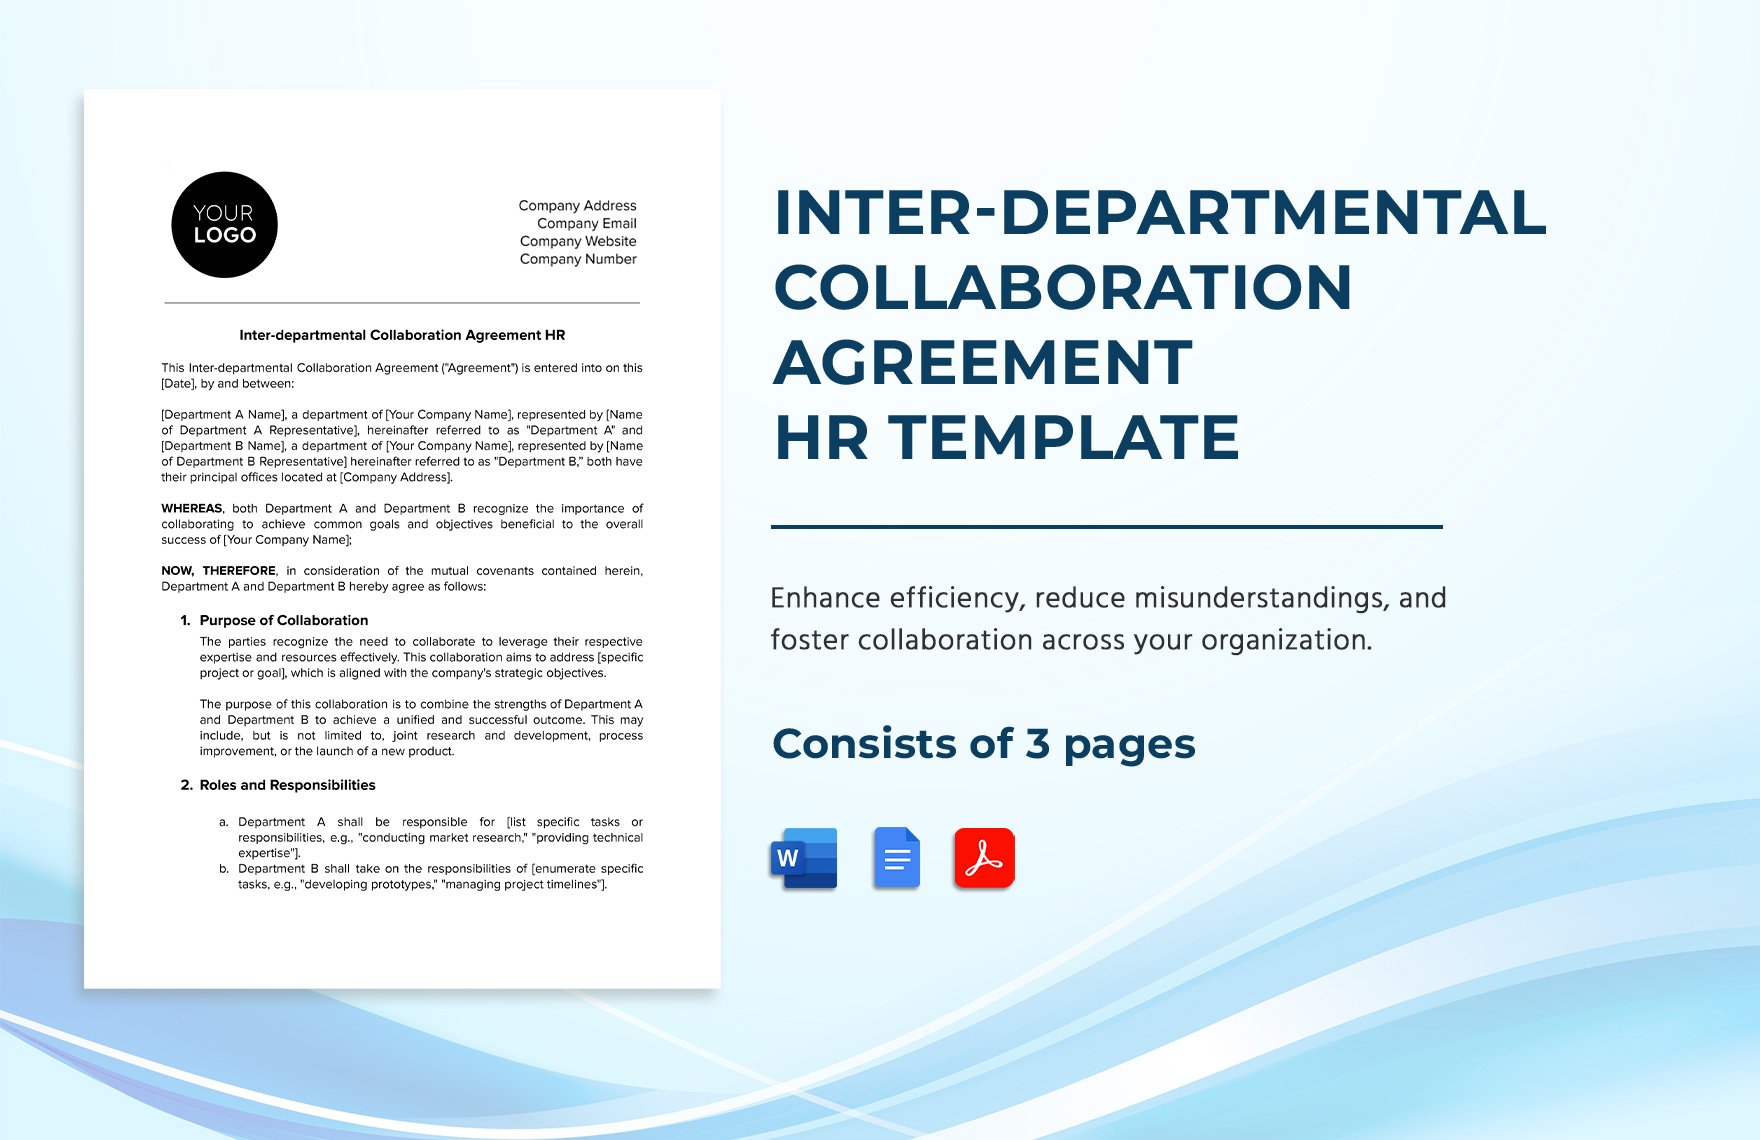 Inter-departmental Collaboration Agreement HR Template in Word, Google Docs, PDF